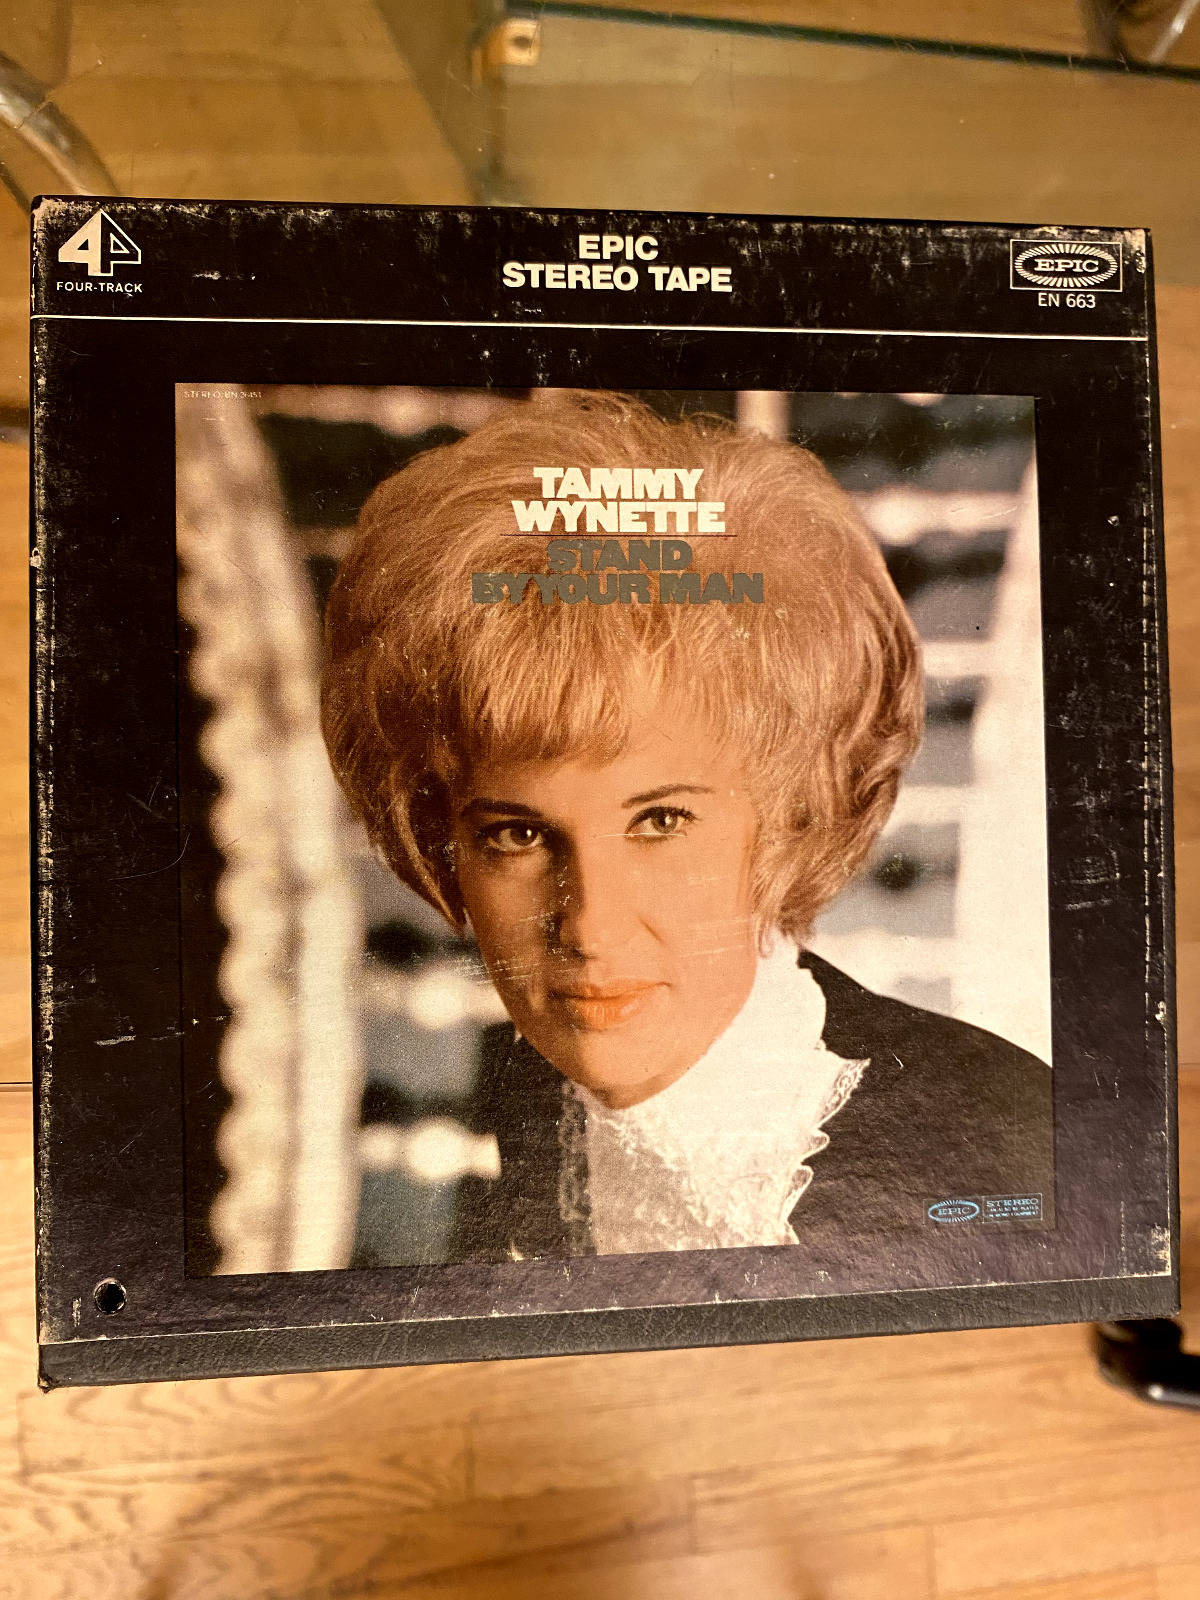 Tammy Wynette: Stand By Your Man (1969) Reel To Reel 7 ½ ips 4-Track Stereo